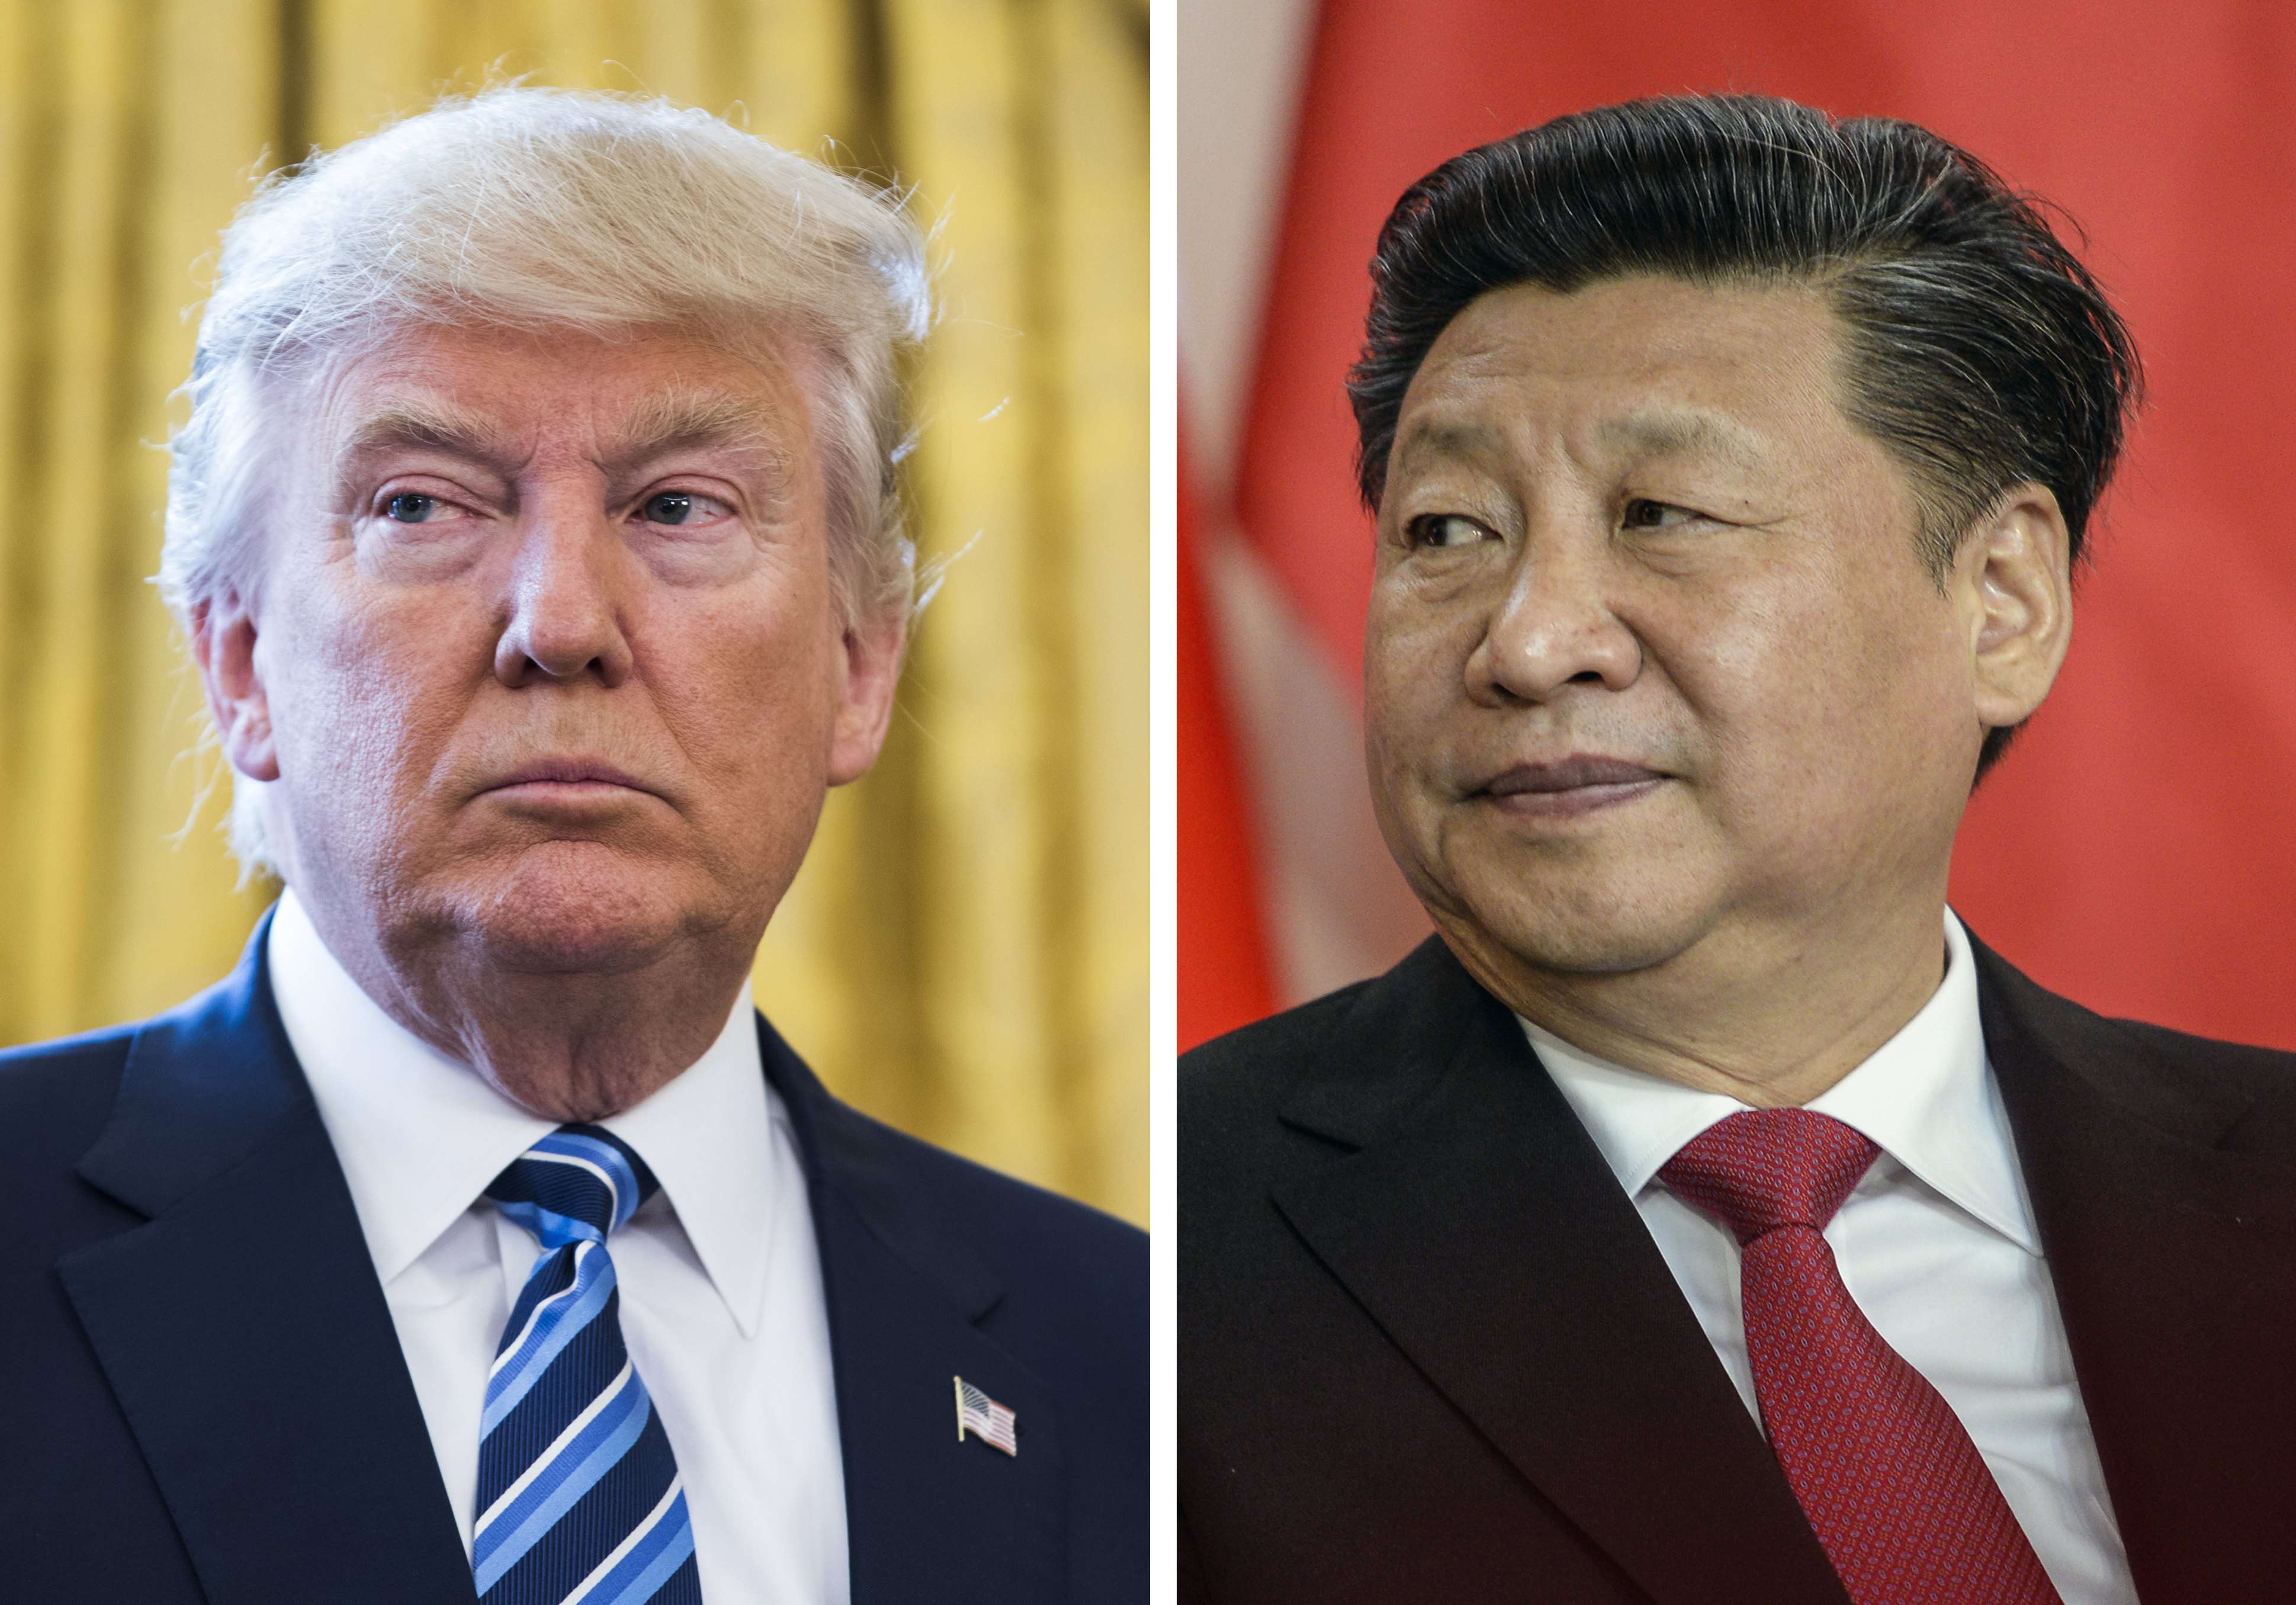 Donald Trump’s ascent to the White House may usher in a new cold war, pitting the US against President Xi Jinping’s China. Photo: EPA